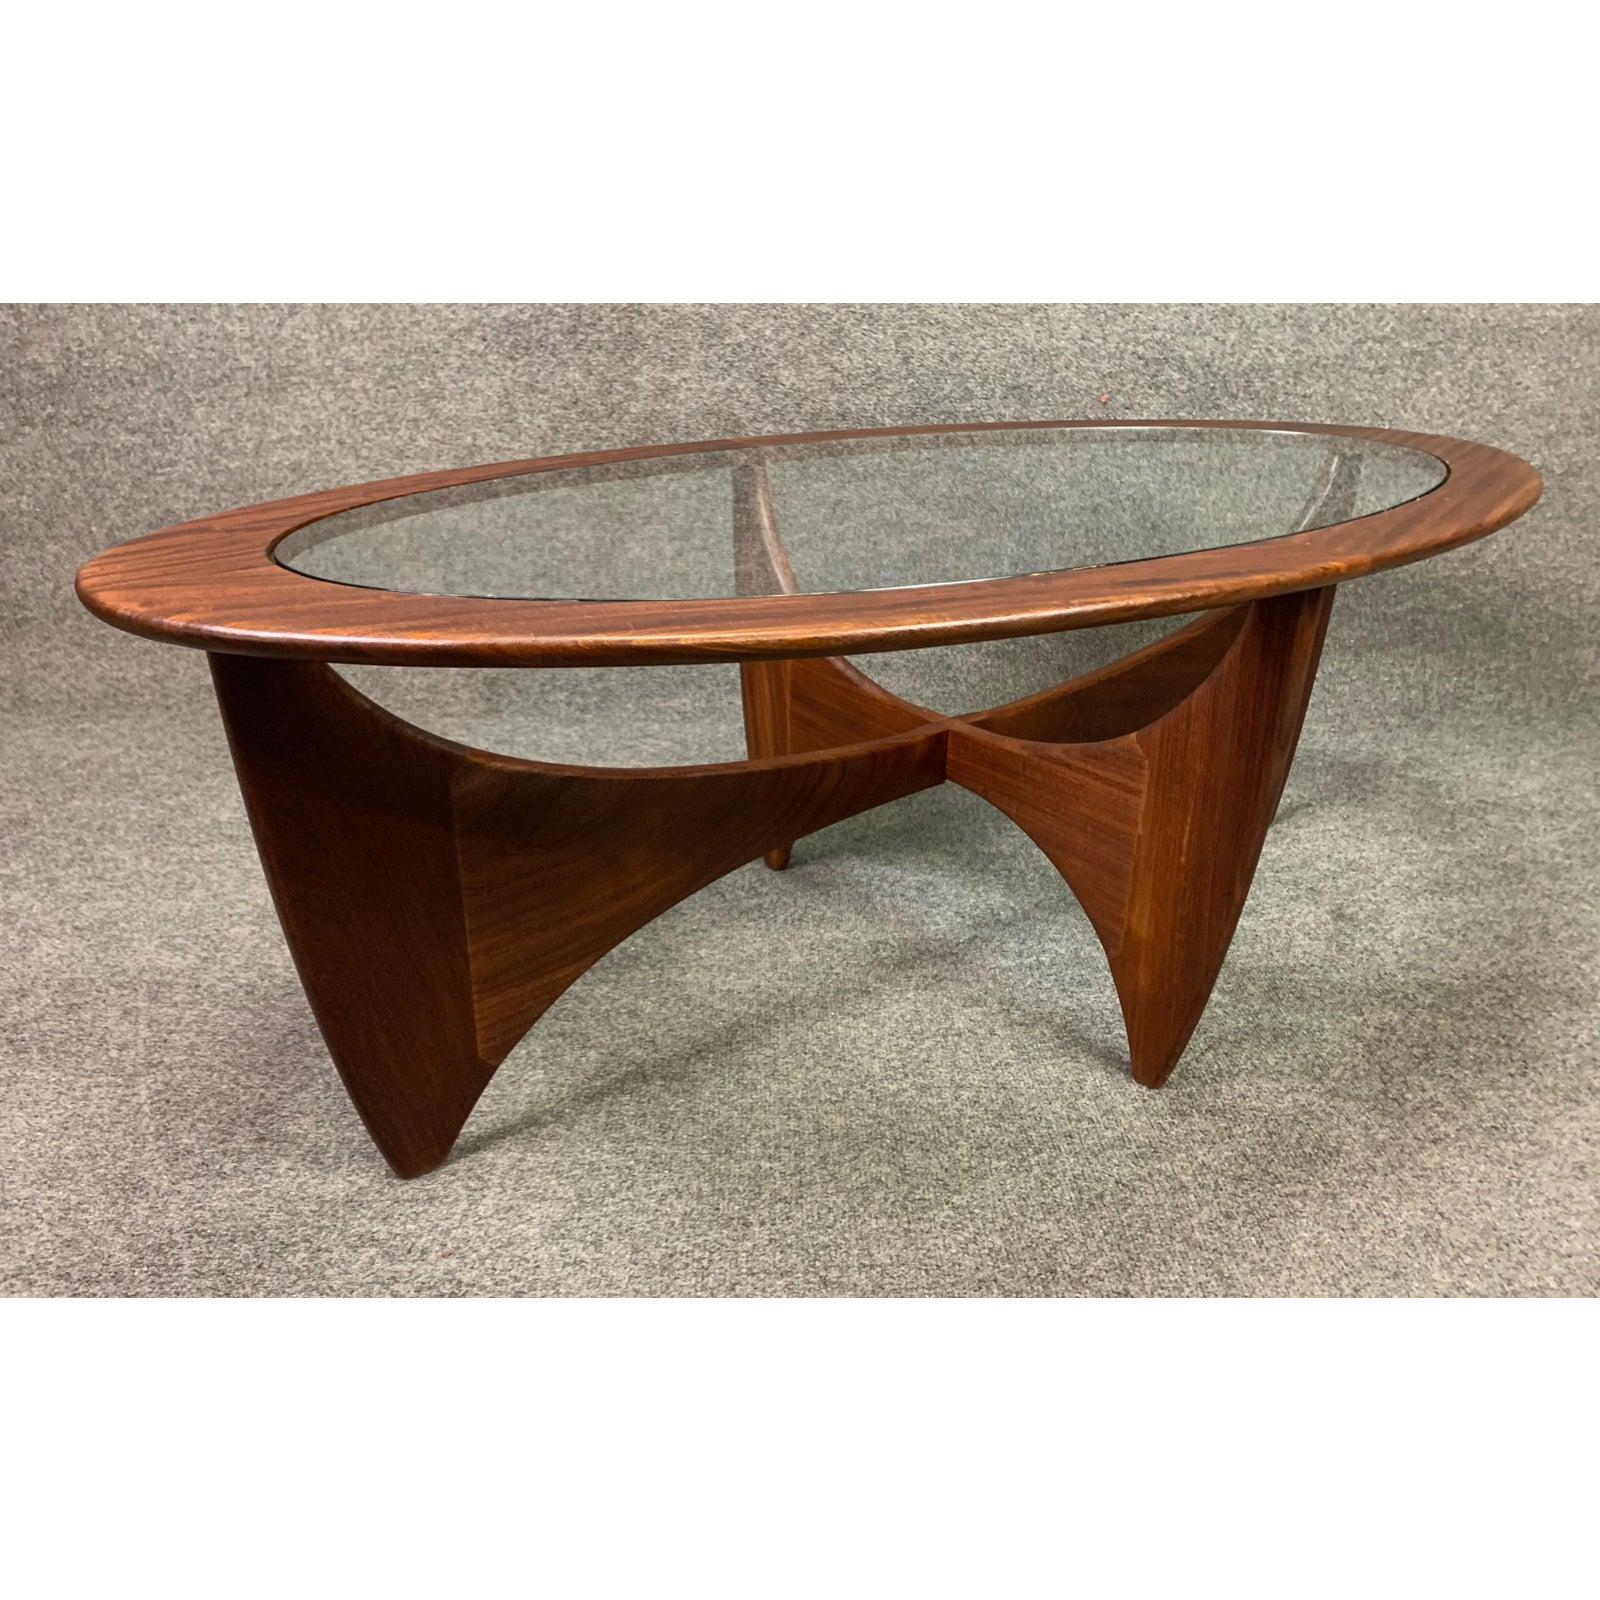 Here is a sculptural vintage Mid-Century Modern 